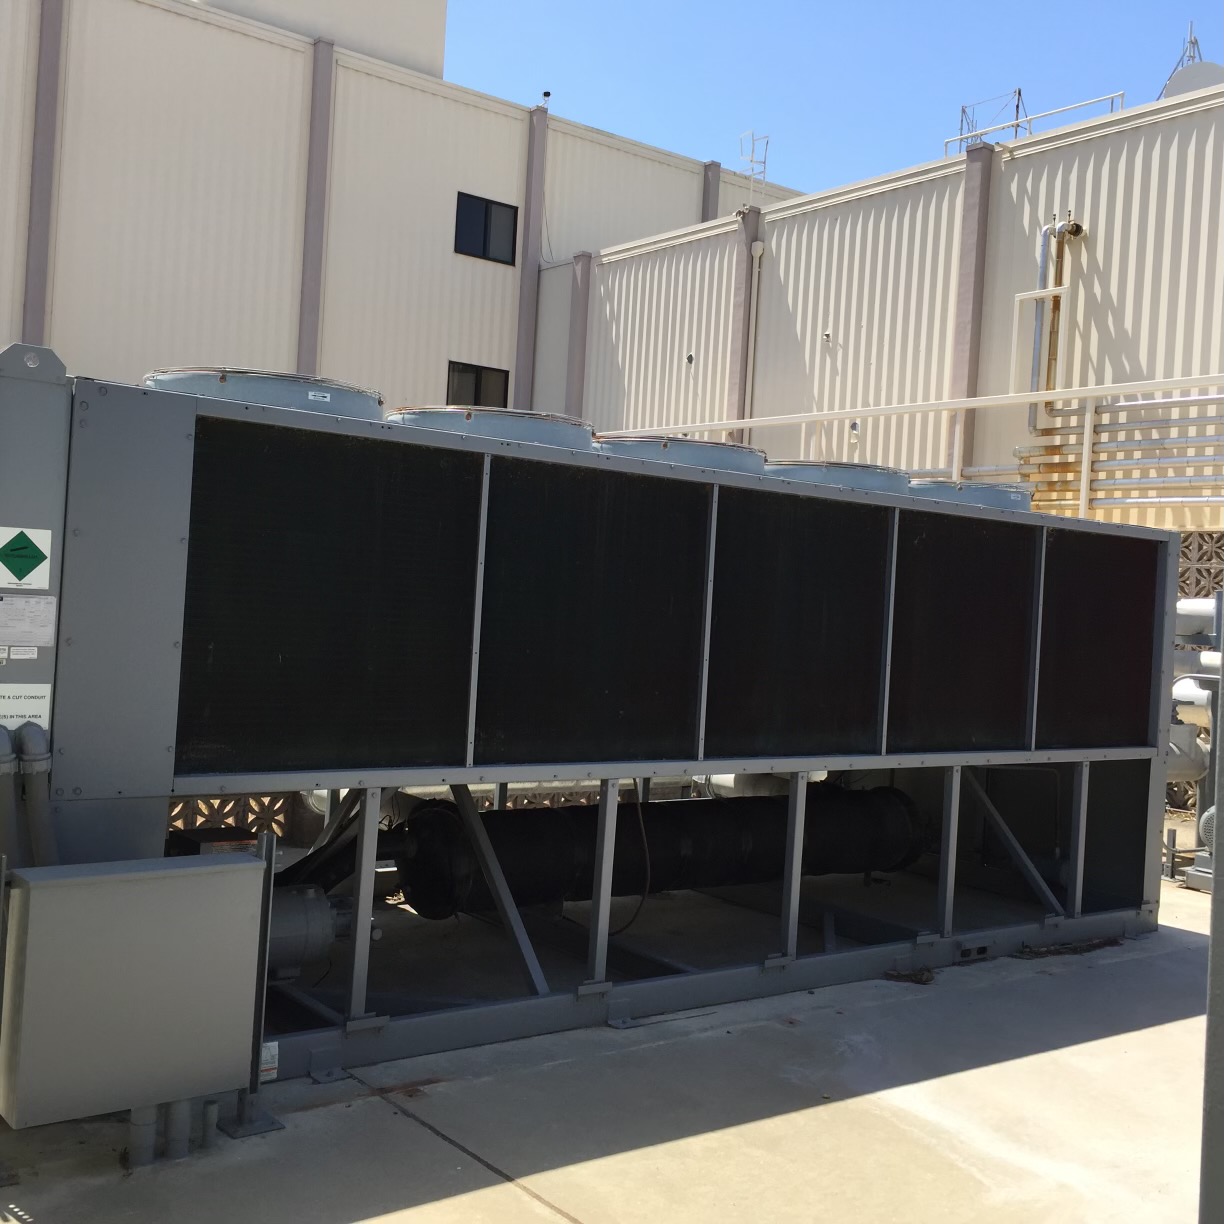 Used Chiller Buyers in Dallas TX 